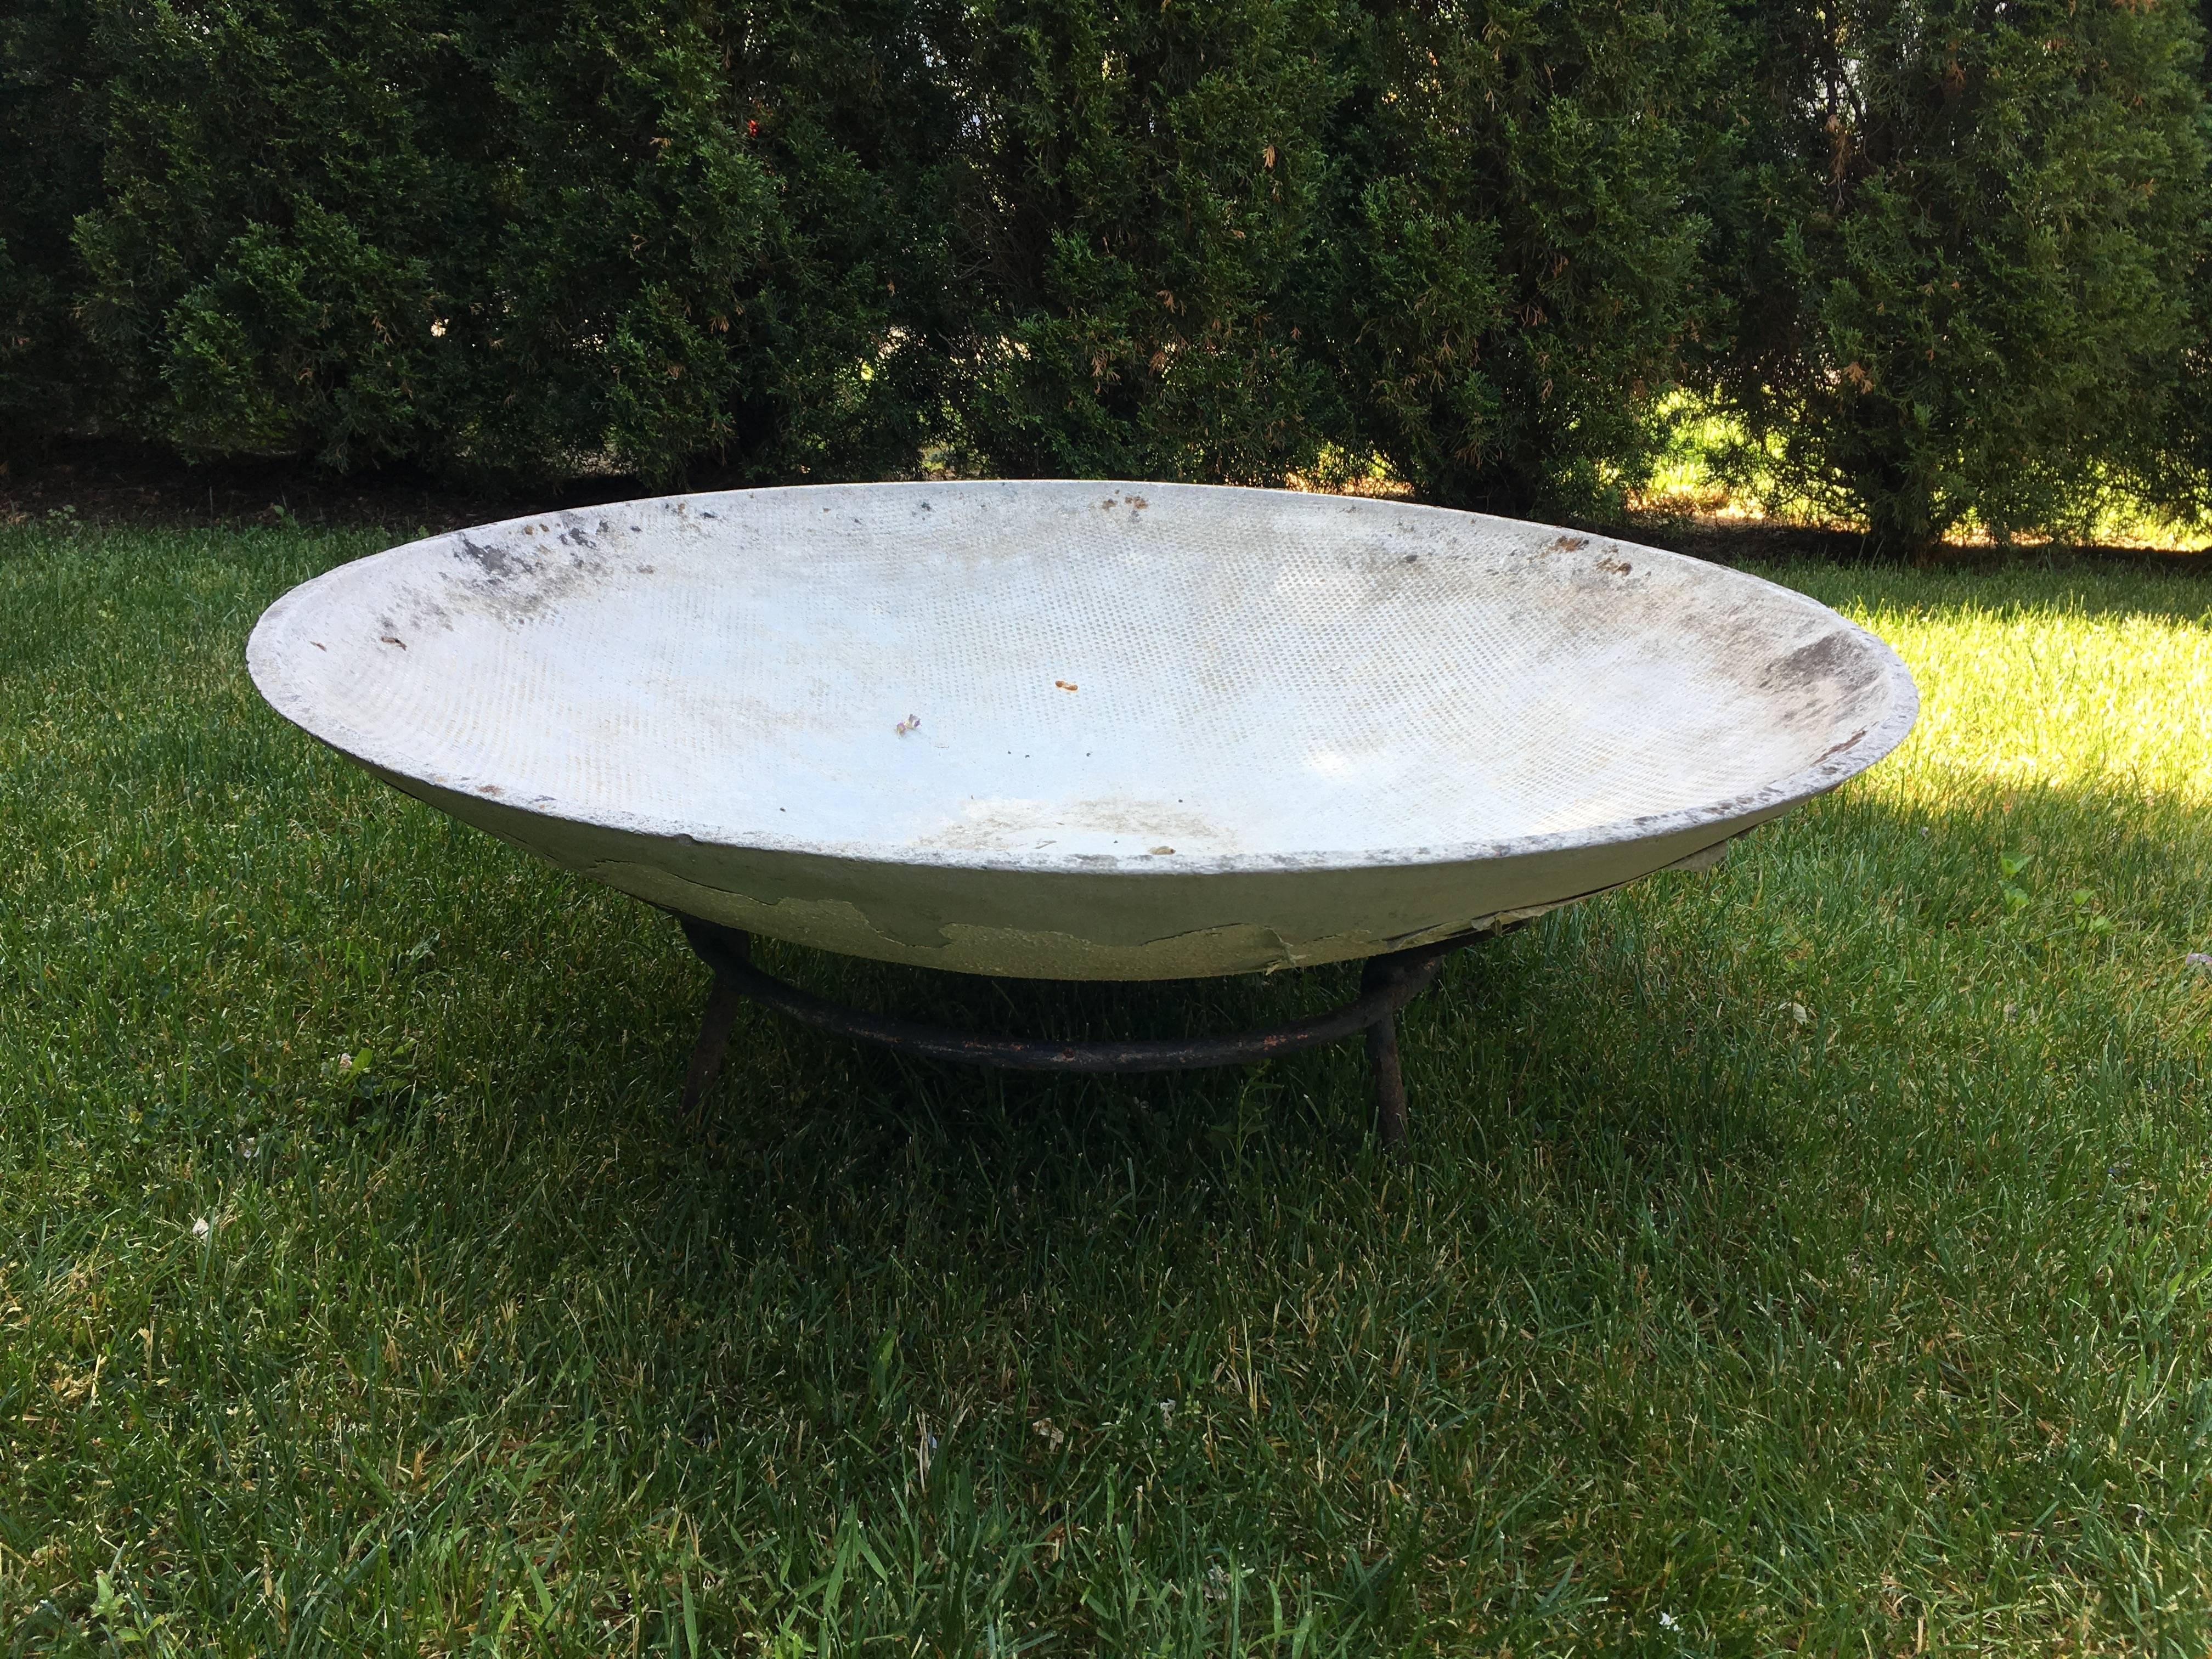 This classic Mid-Century Modern saucer planter in original iron stand is a bit smaller than the other five that we have, but works beautifully alone or in combination with our other saucer planters. Designed by the iconic Willy Guhl, numbered, and